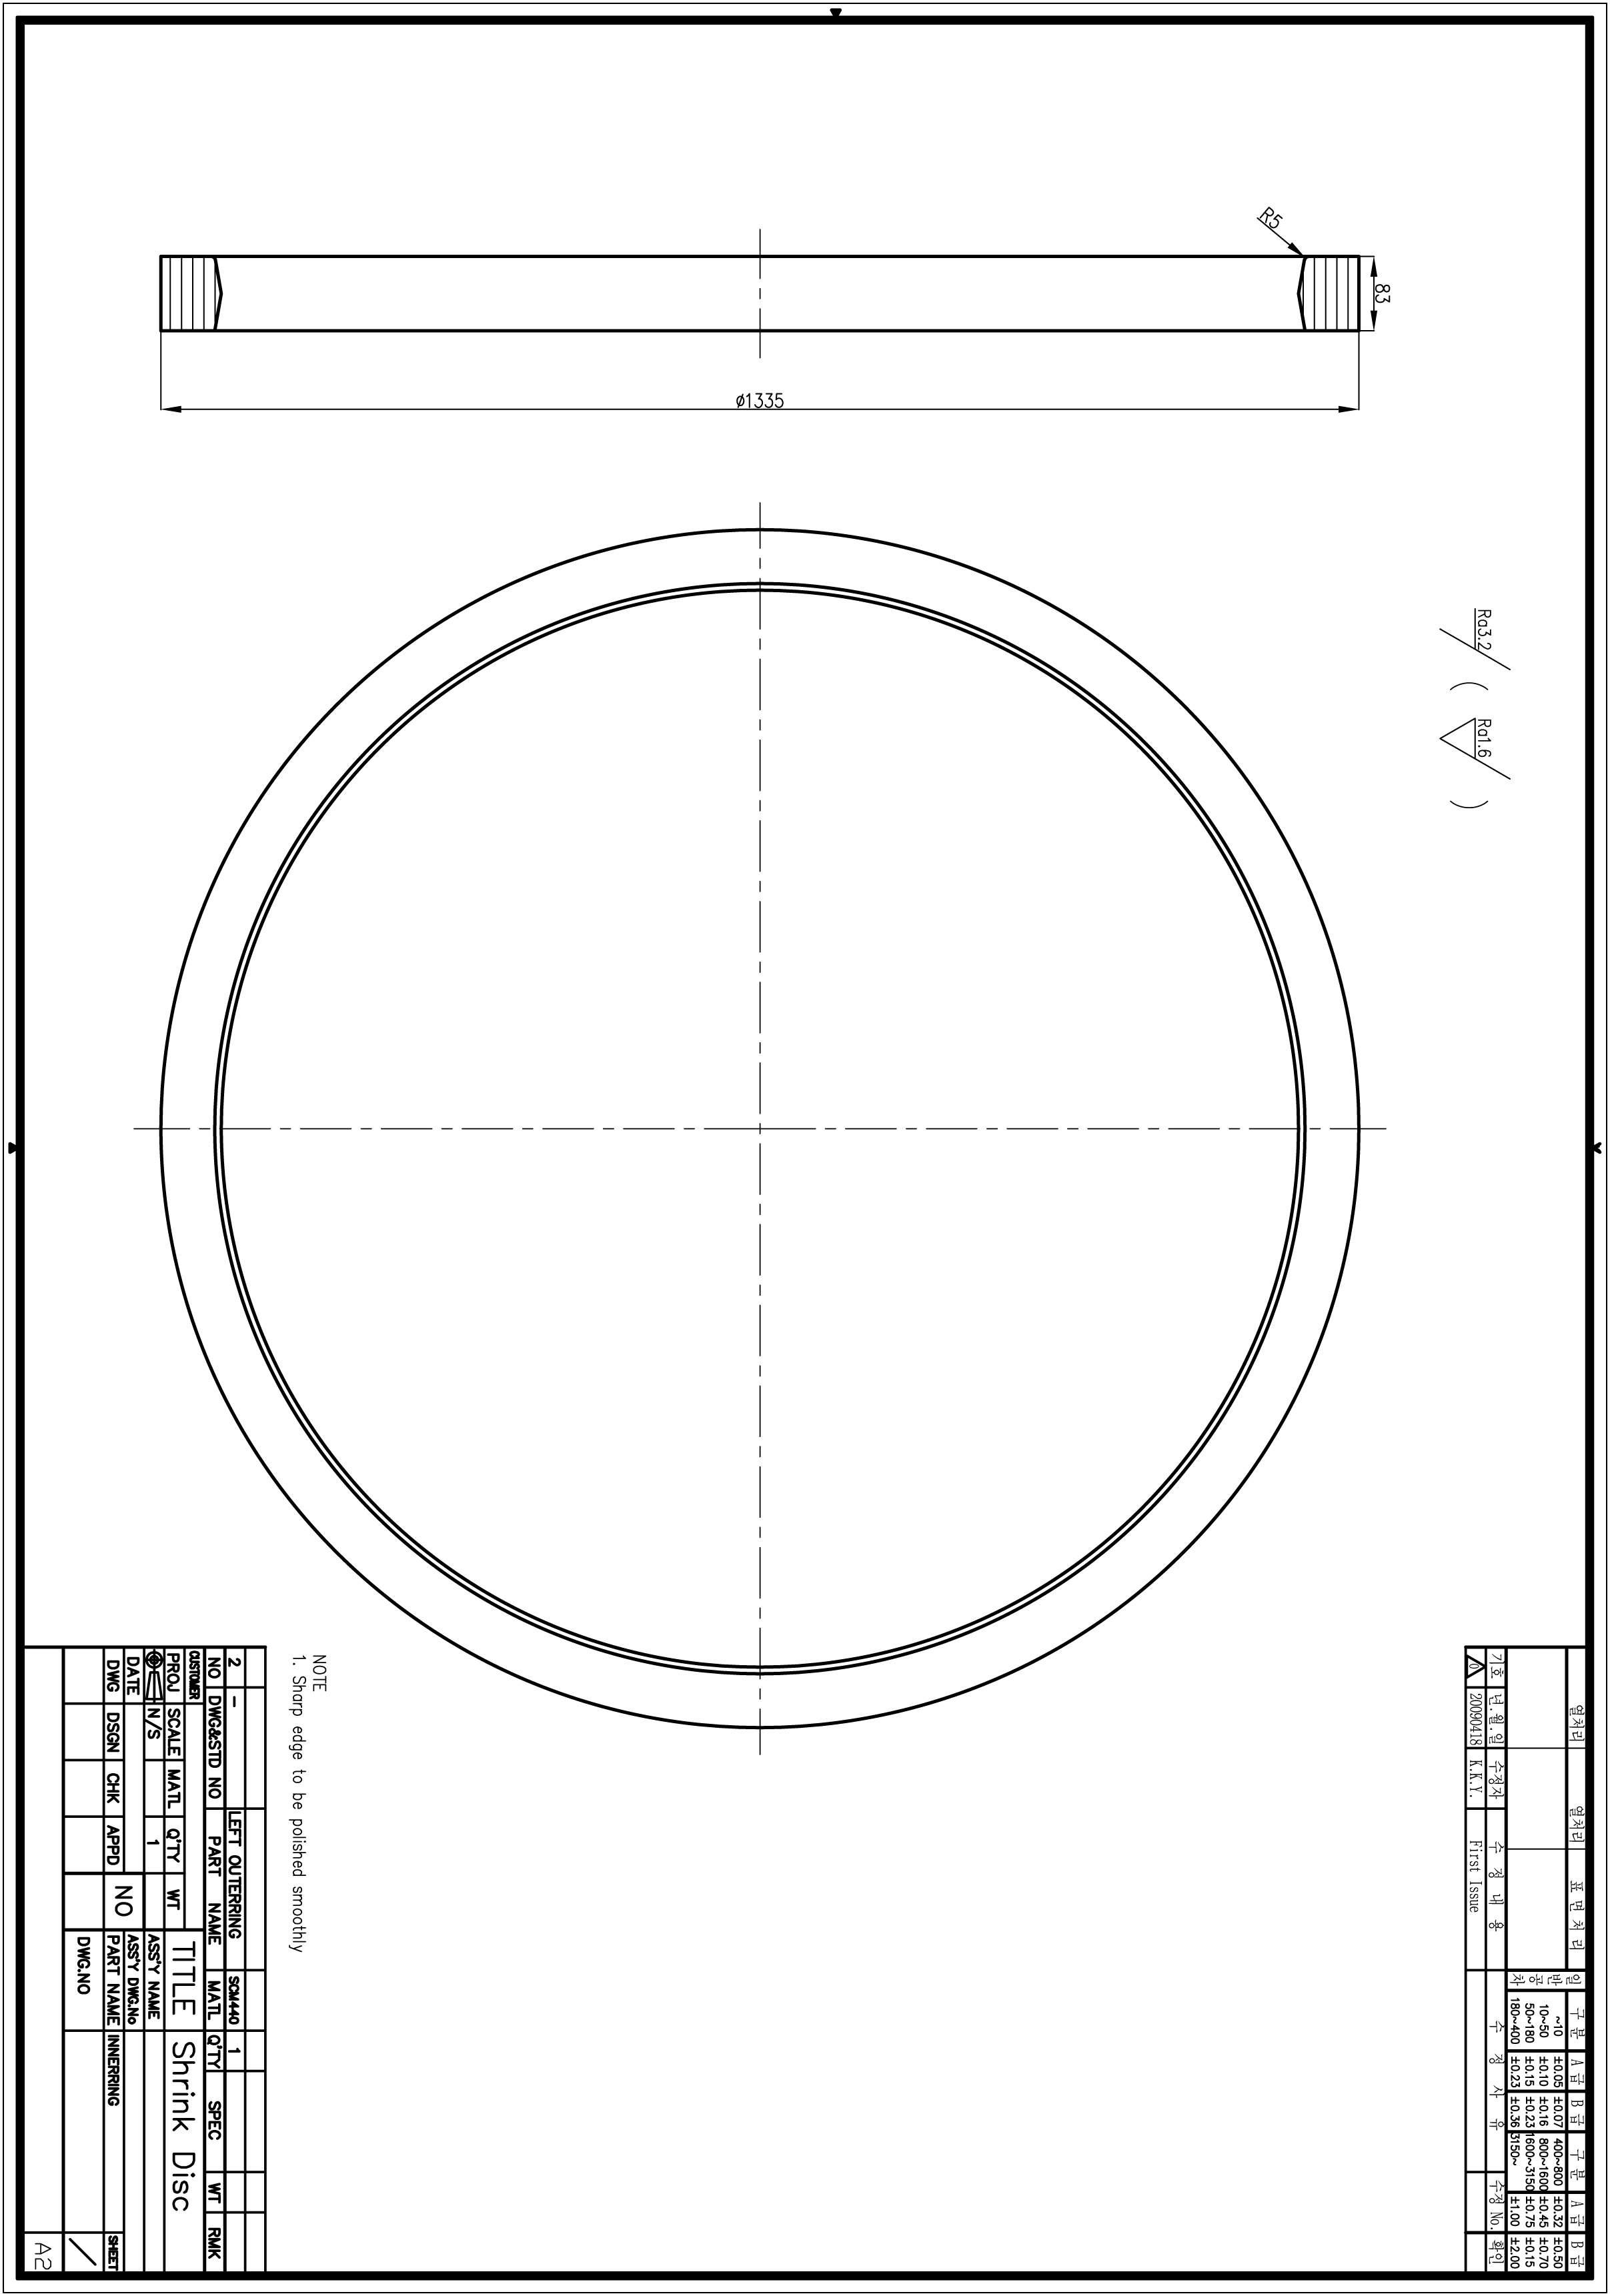 Part drawing of shrink disc with wedge ring - Wedge